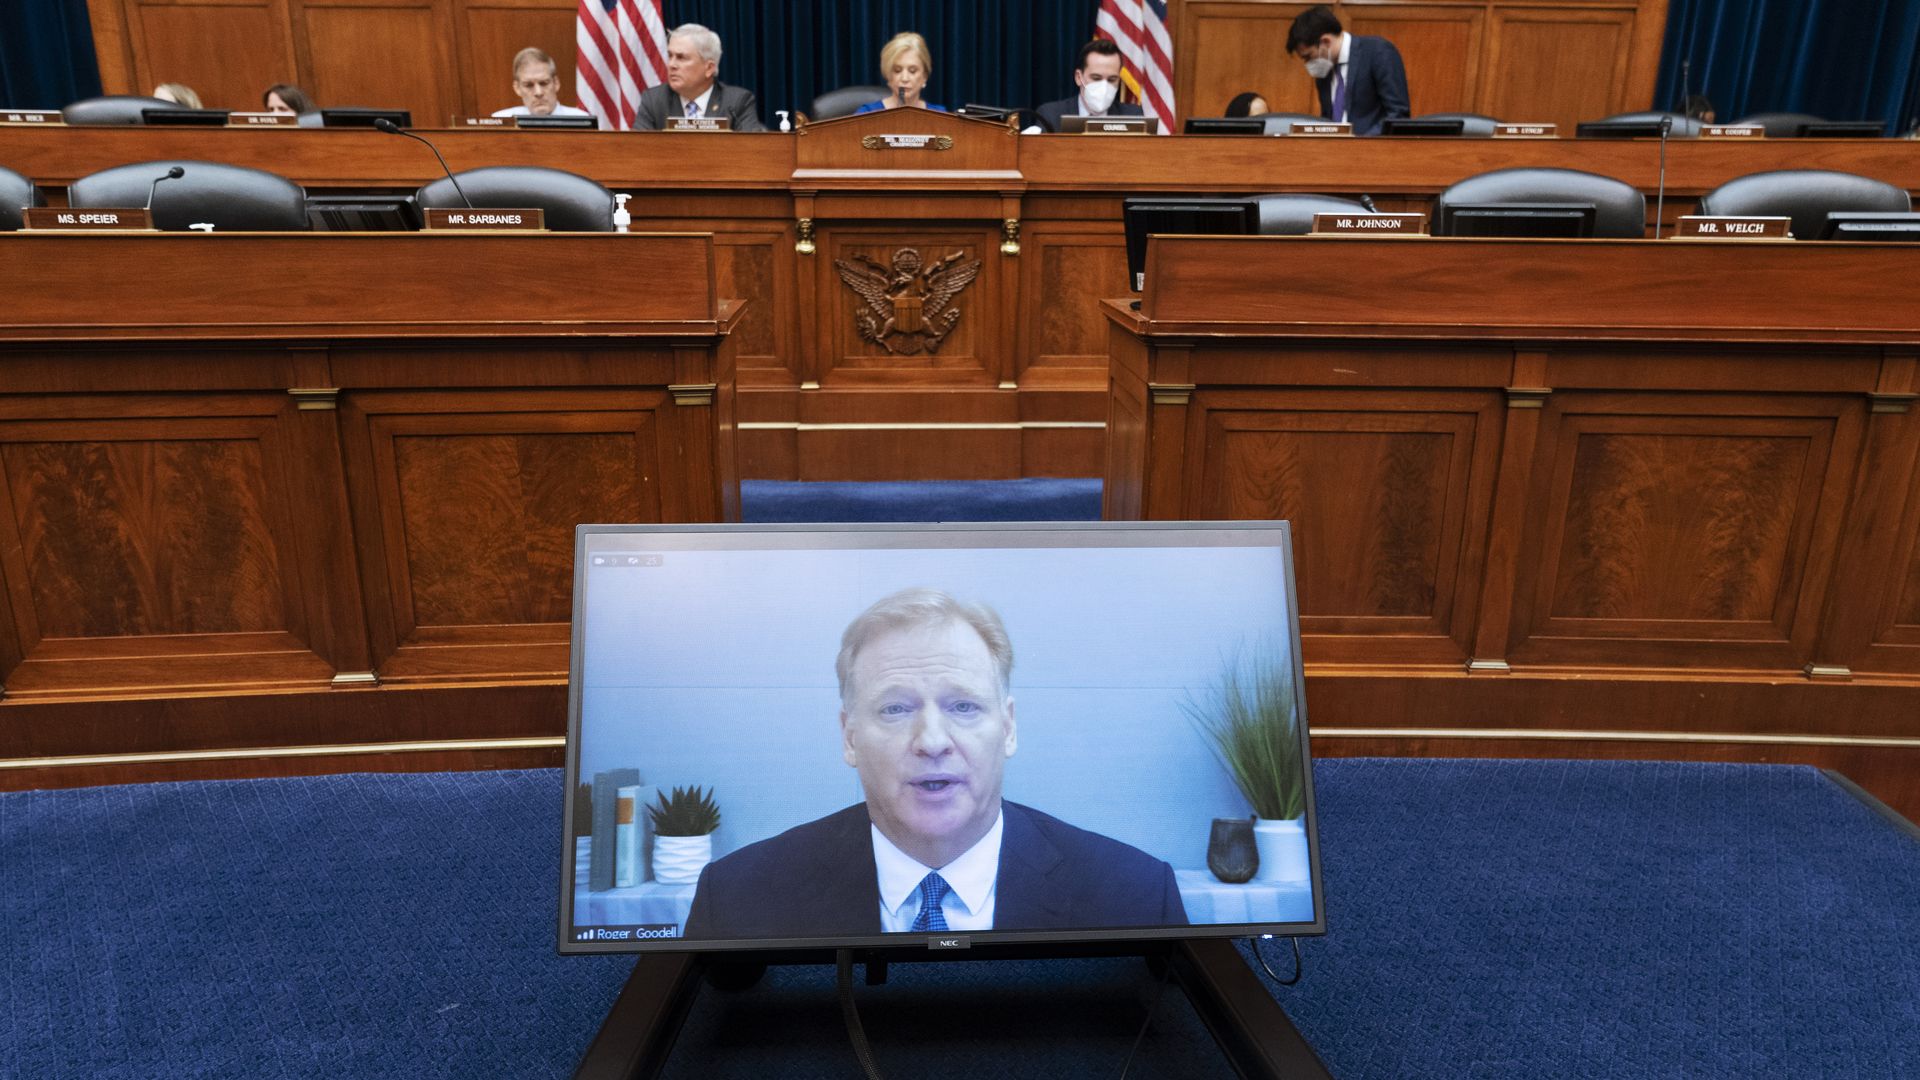 Roger Goodell testifying before Congress